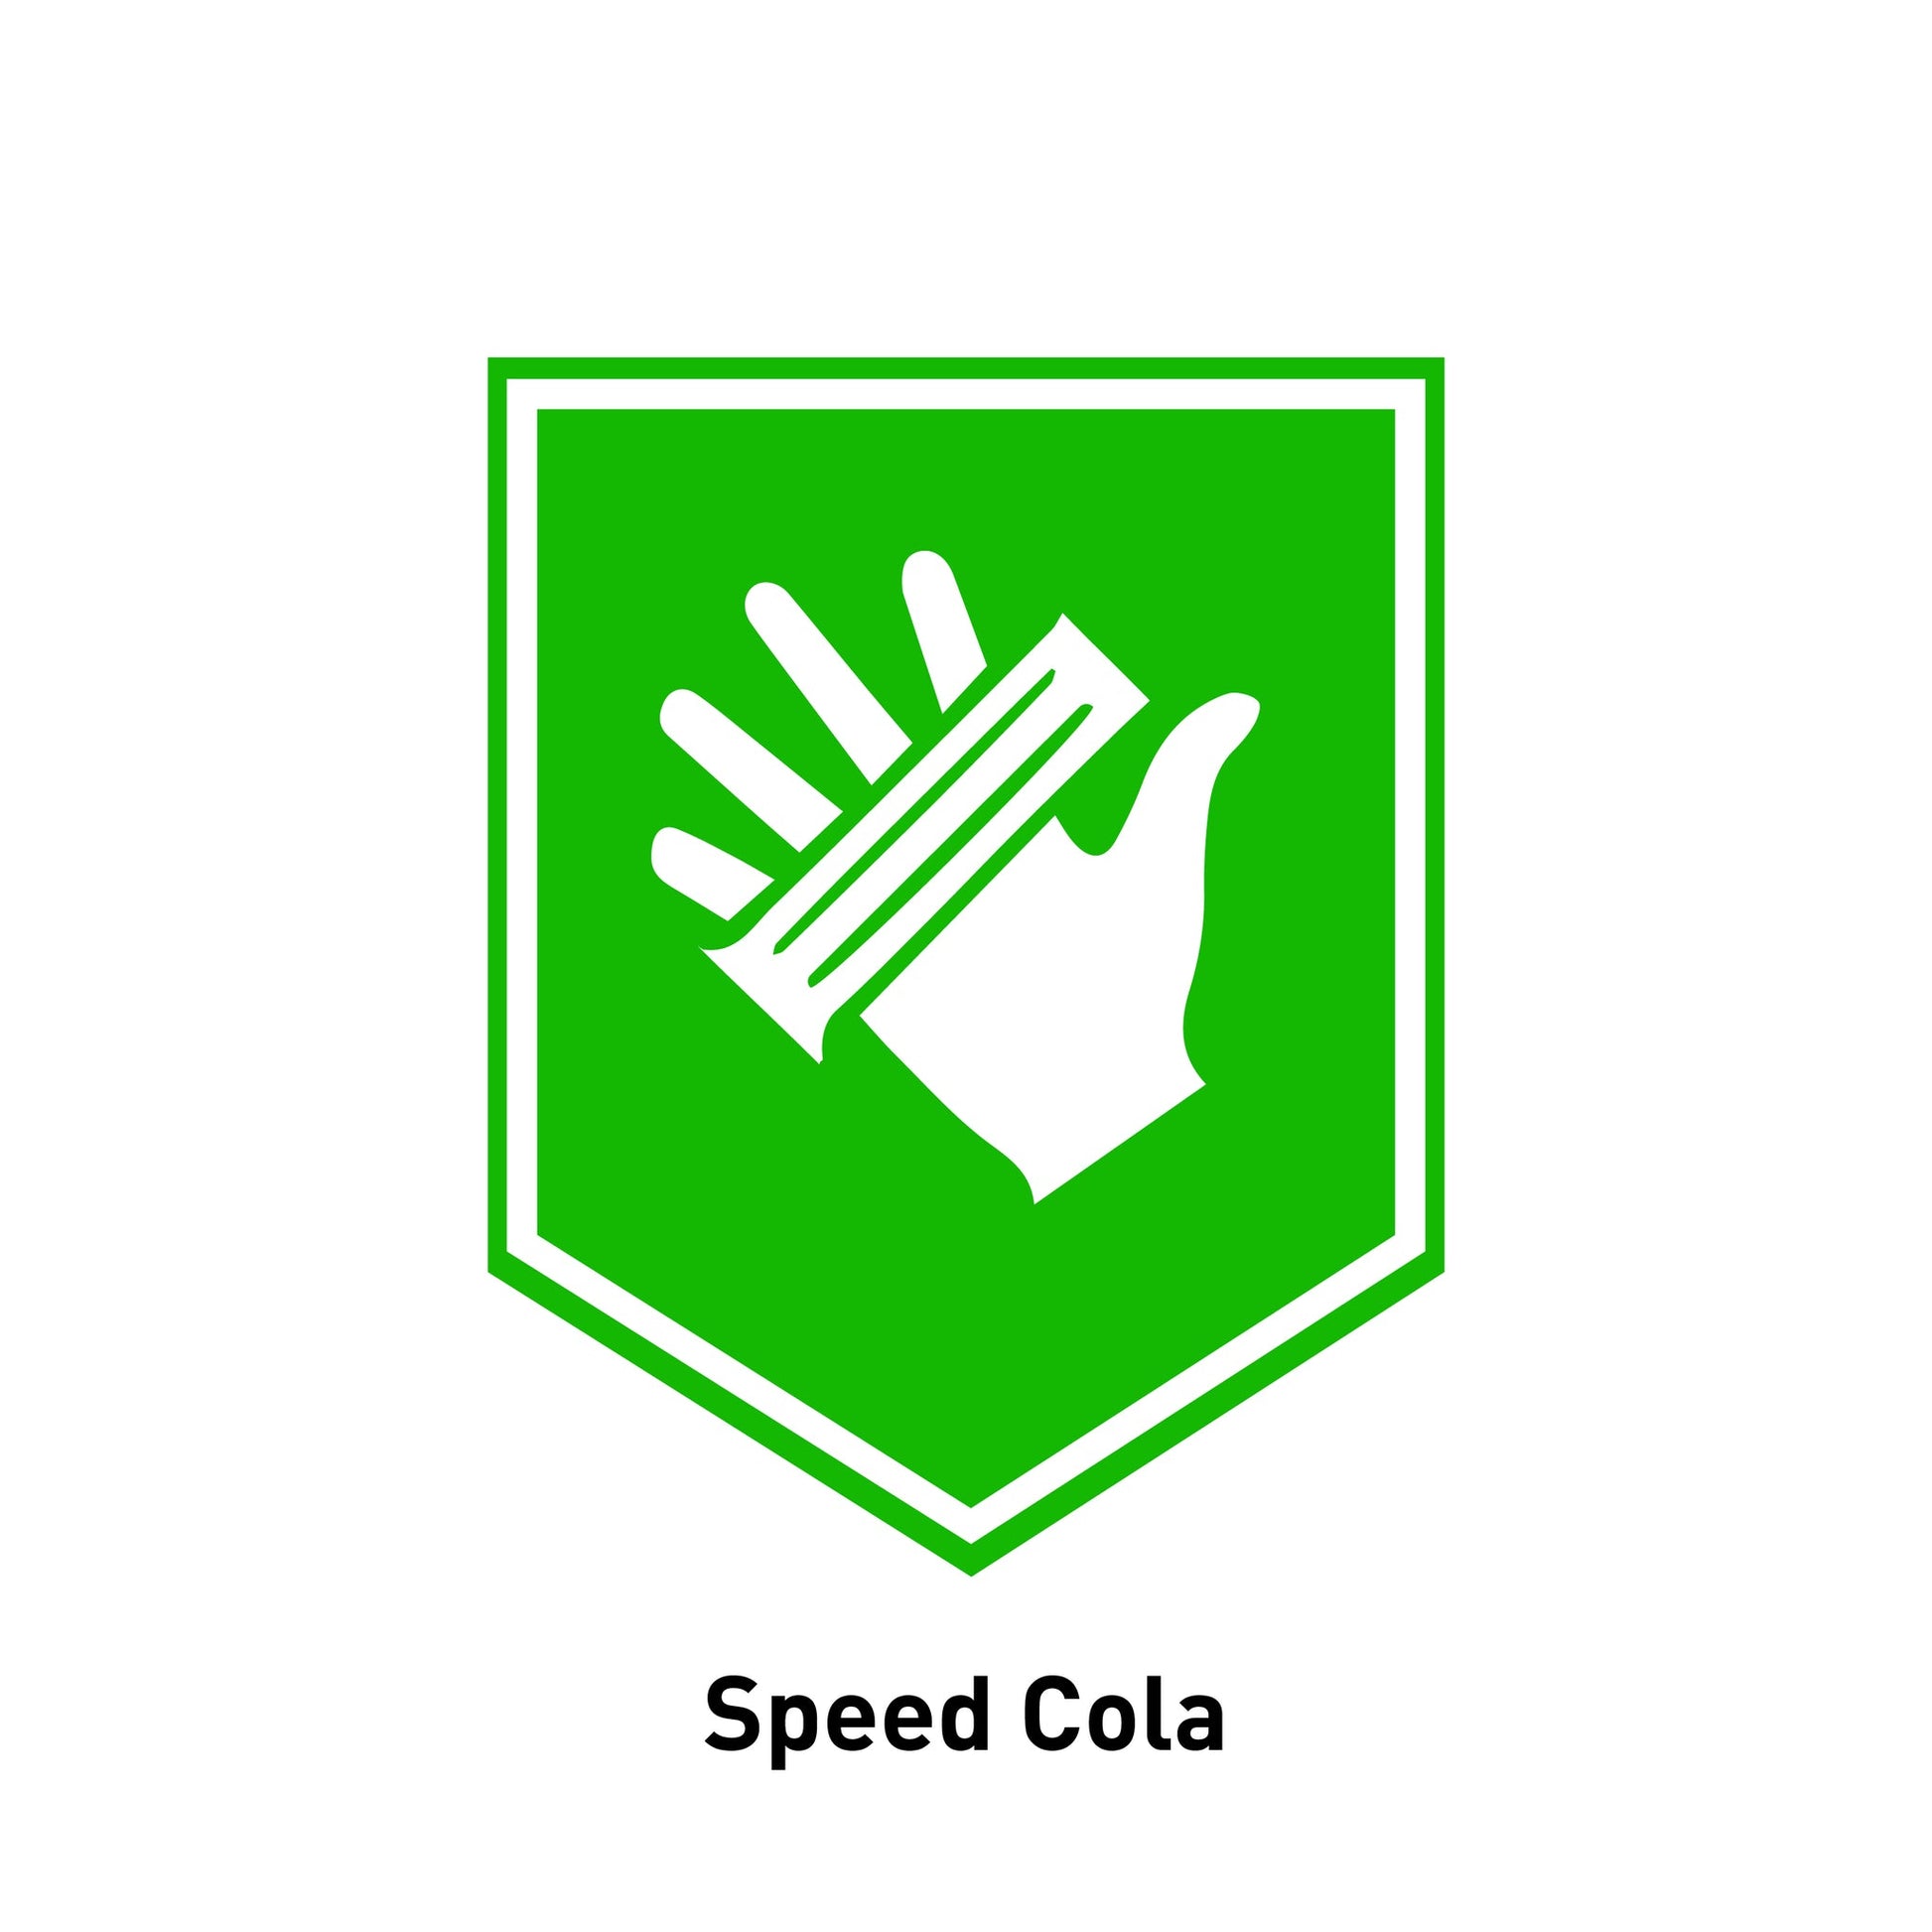 Speed Cola Call of duty gaming decal stickers for kids bedrooms